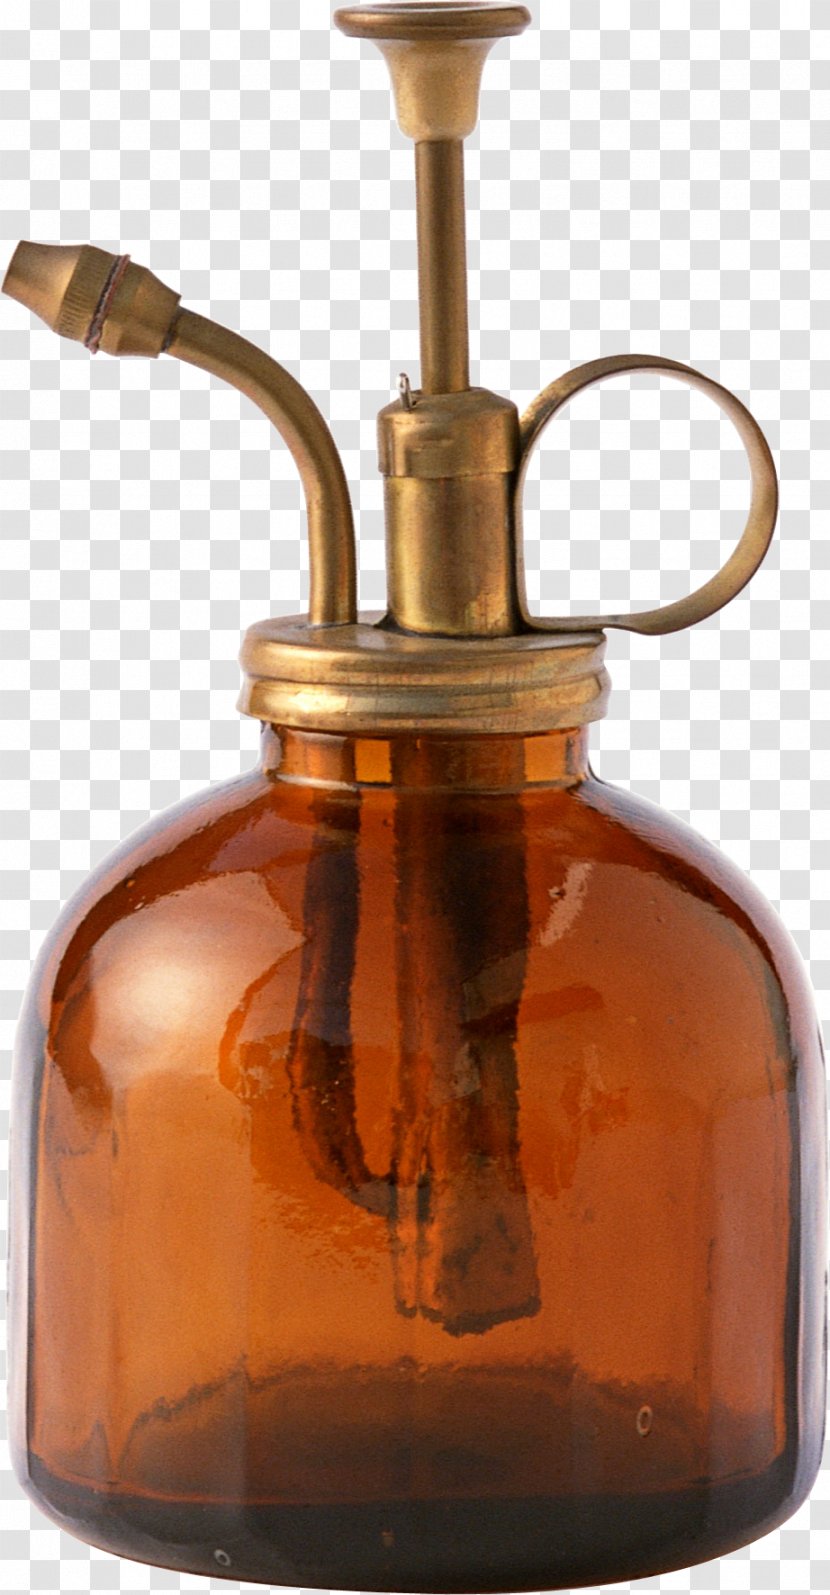 Watering Cans Bottle Glass - Perfume - Specimen Transparent PNG